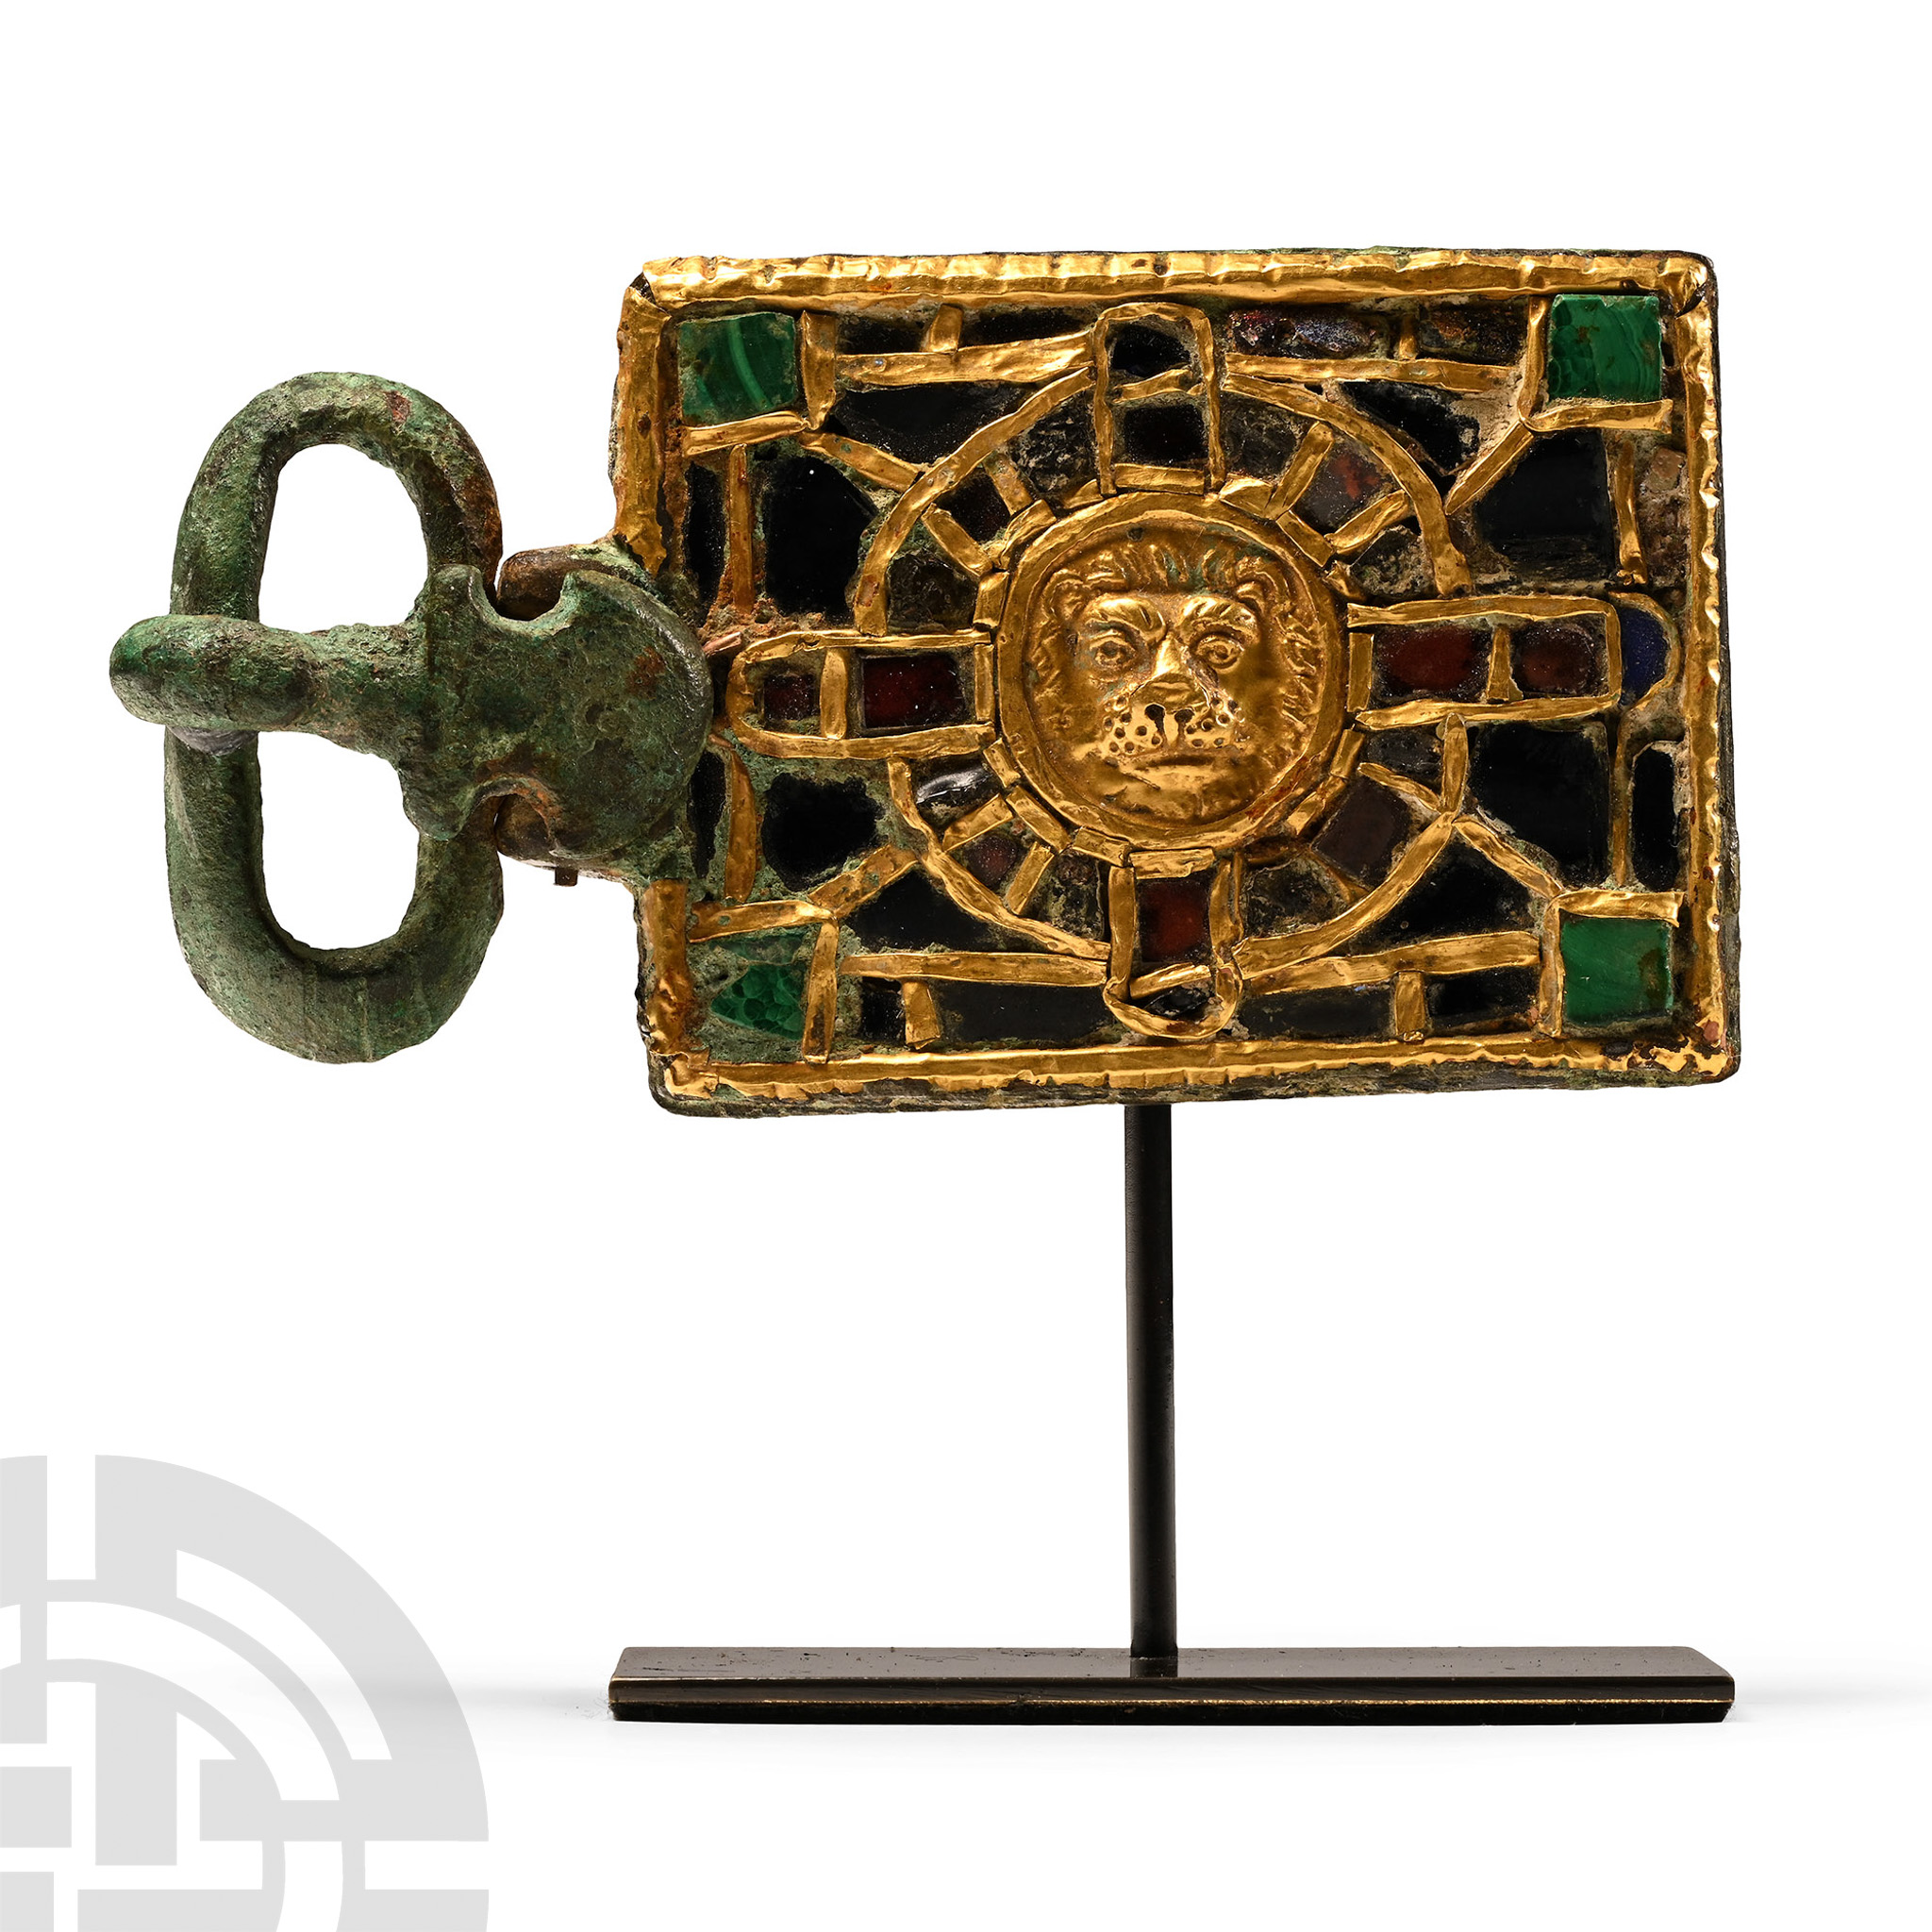 Visigothic Bronze Belt Buckle with Gold and Garnet Inlays - Image 2 of 2